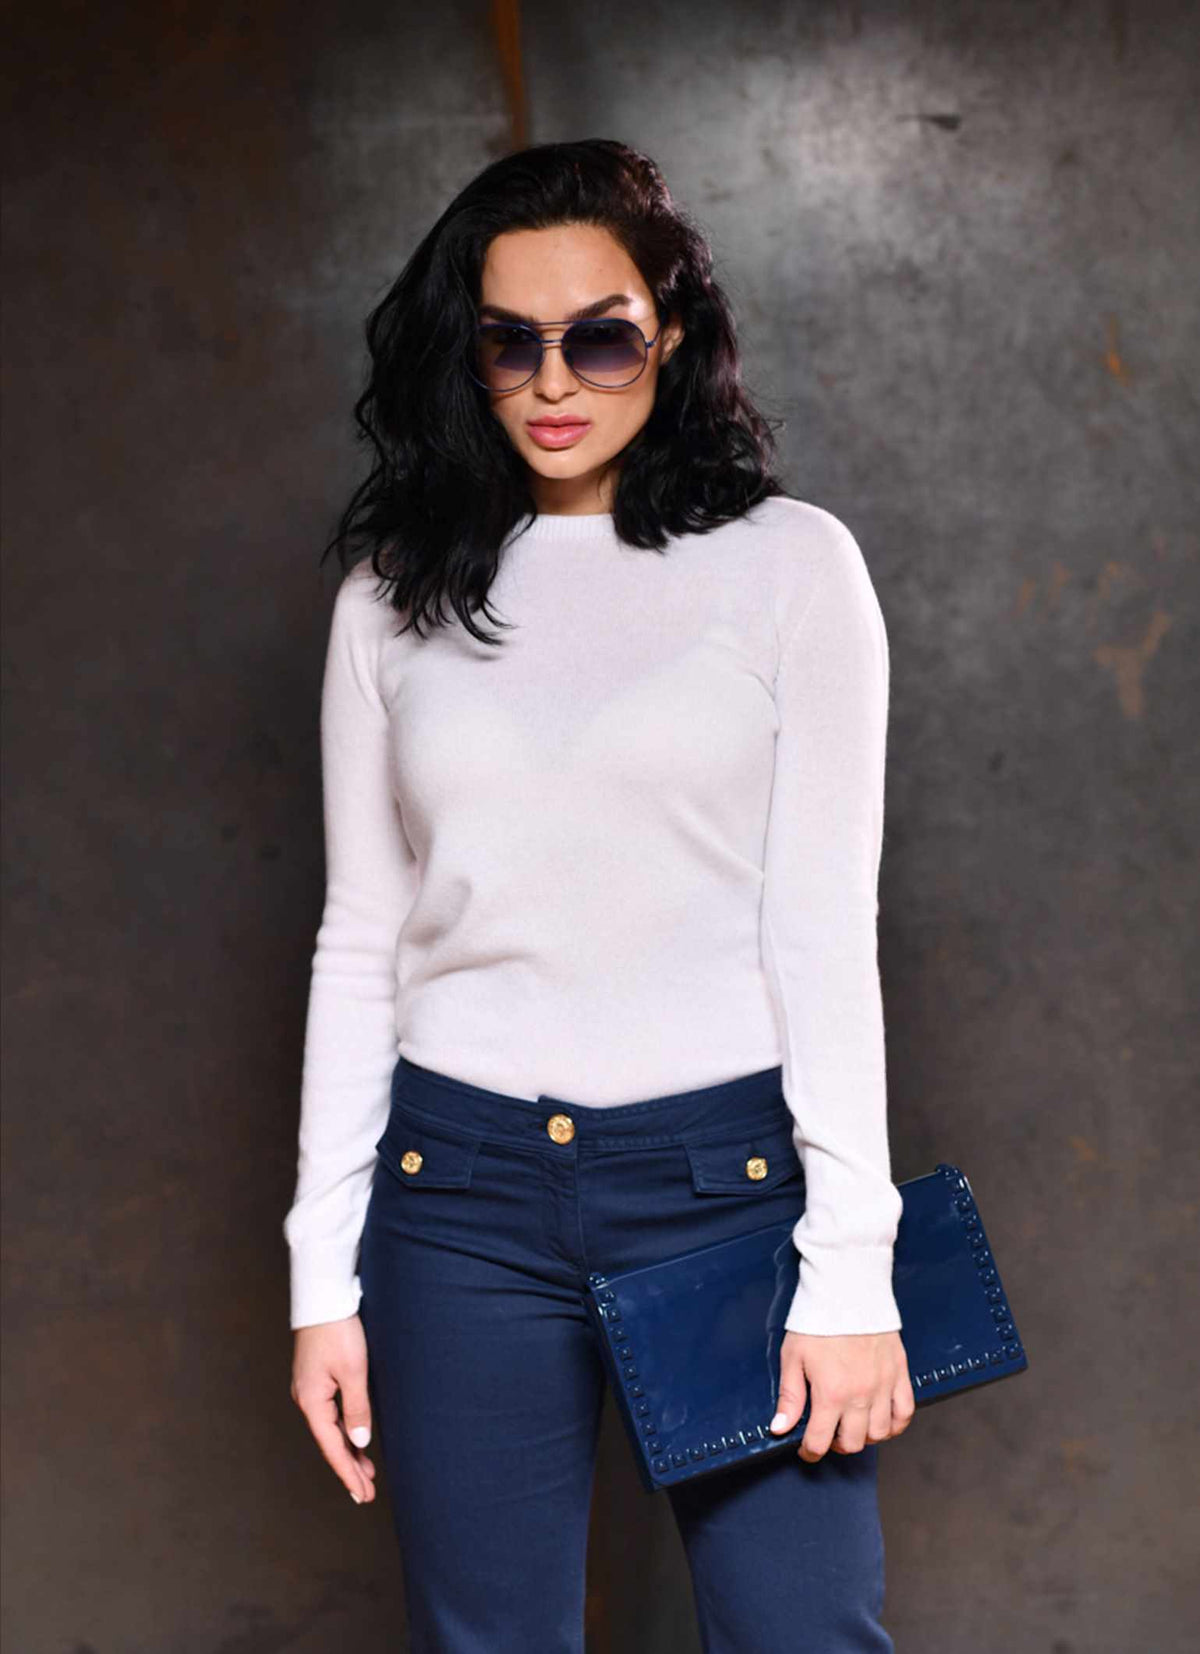 Women wearing Cortina 100% pure round neck cashmere sweater in color white with jelly purses and sunglasses